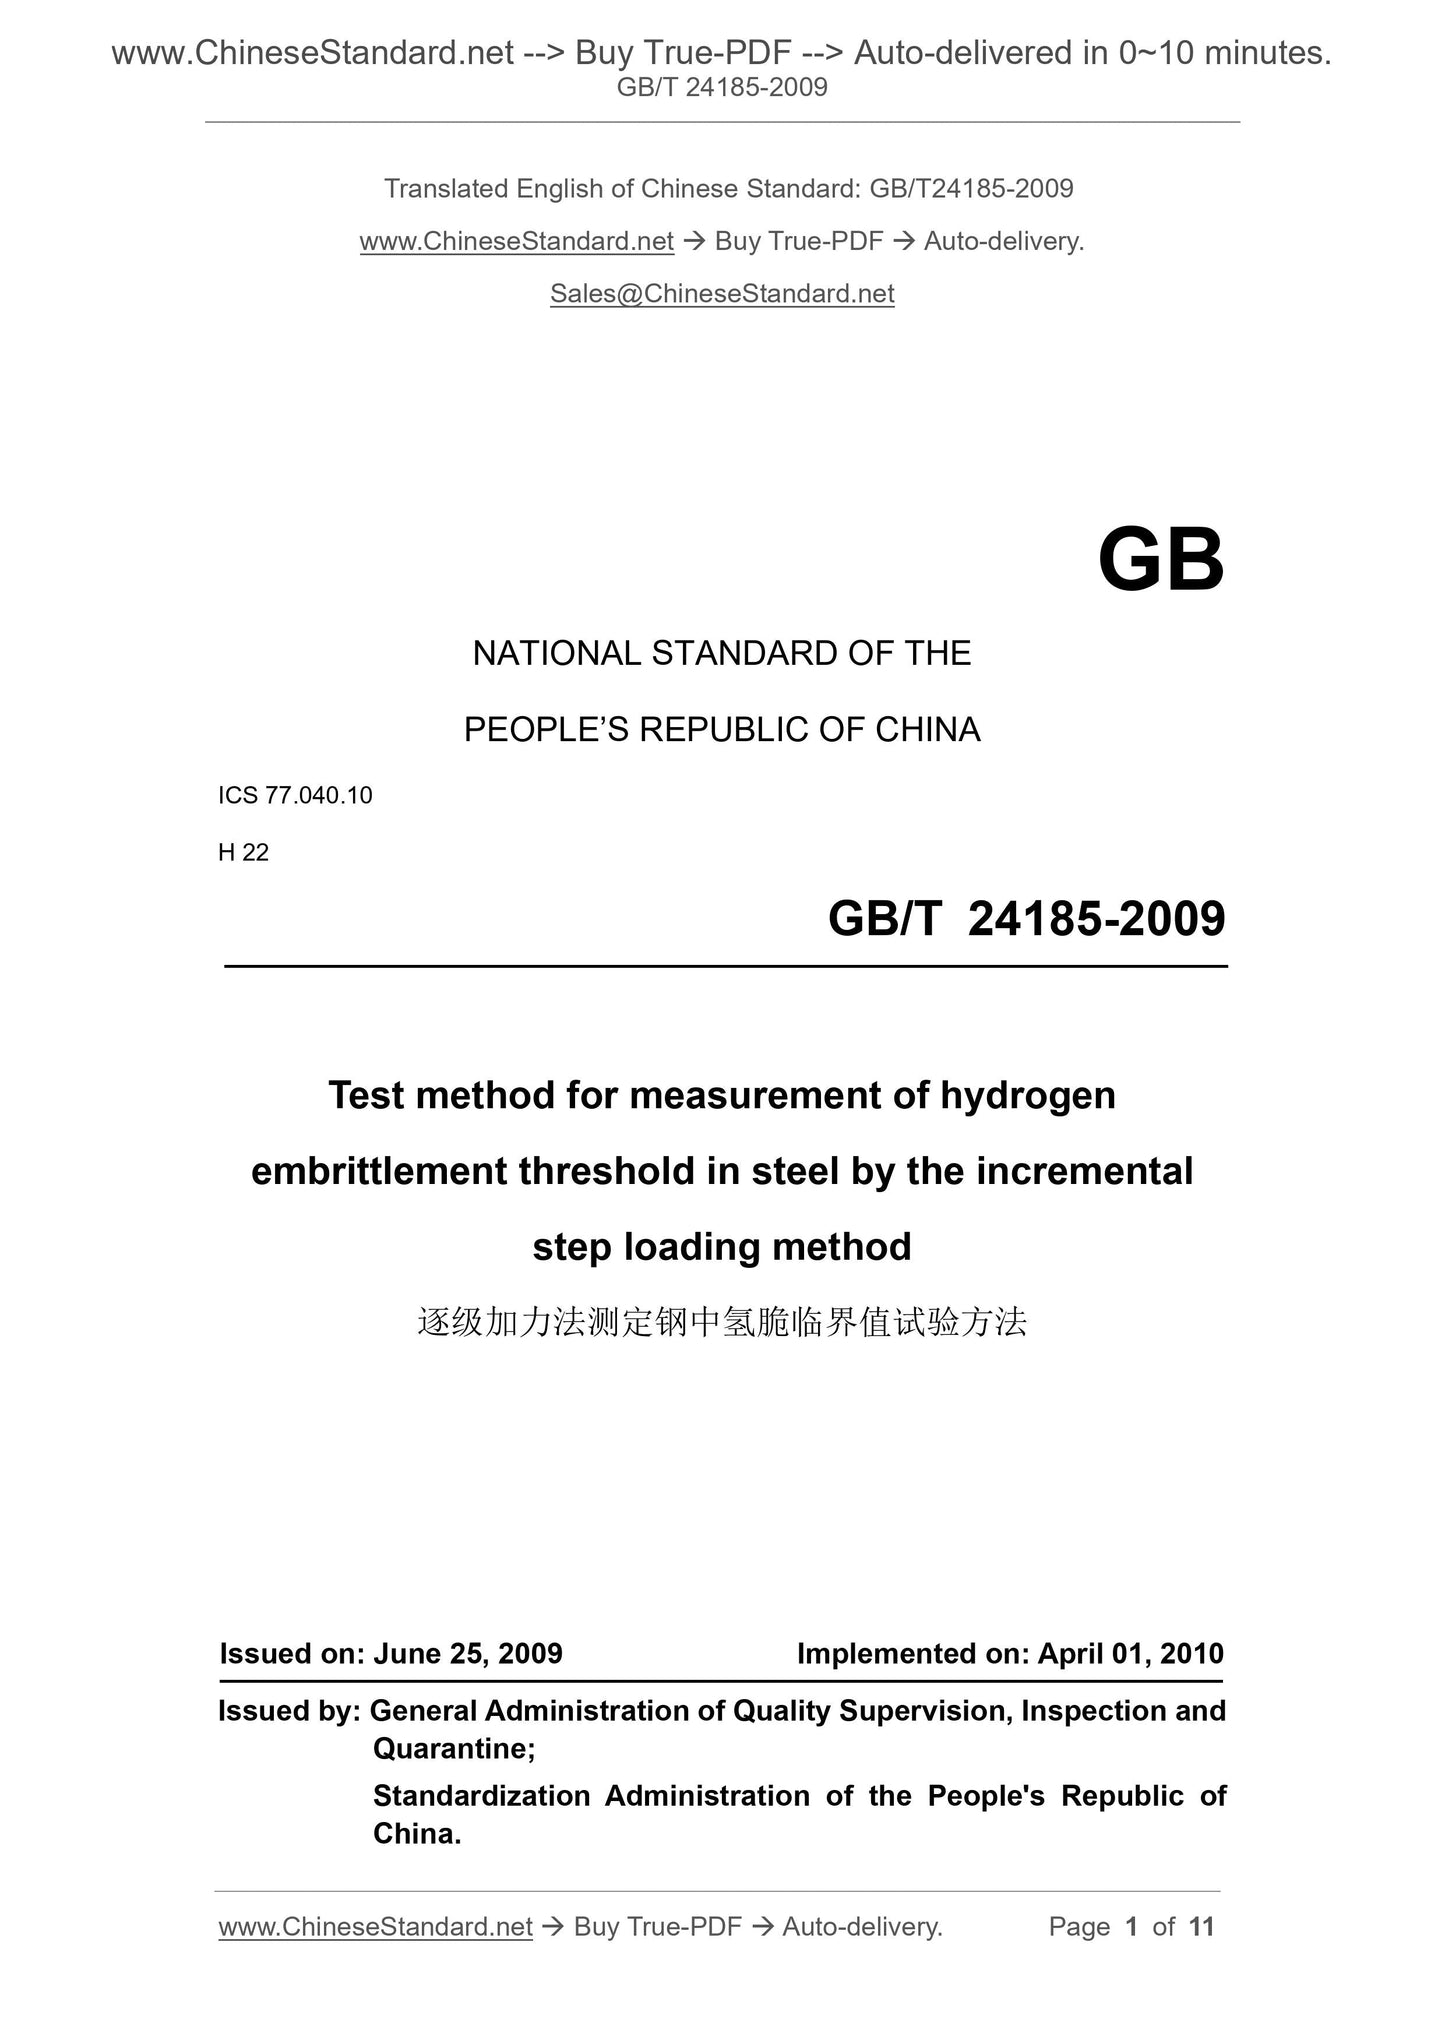 GB/T 24185-2009 Page 1